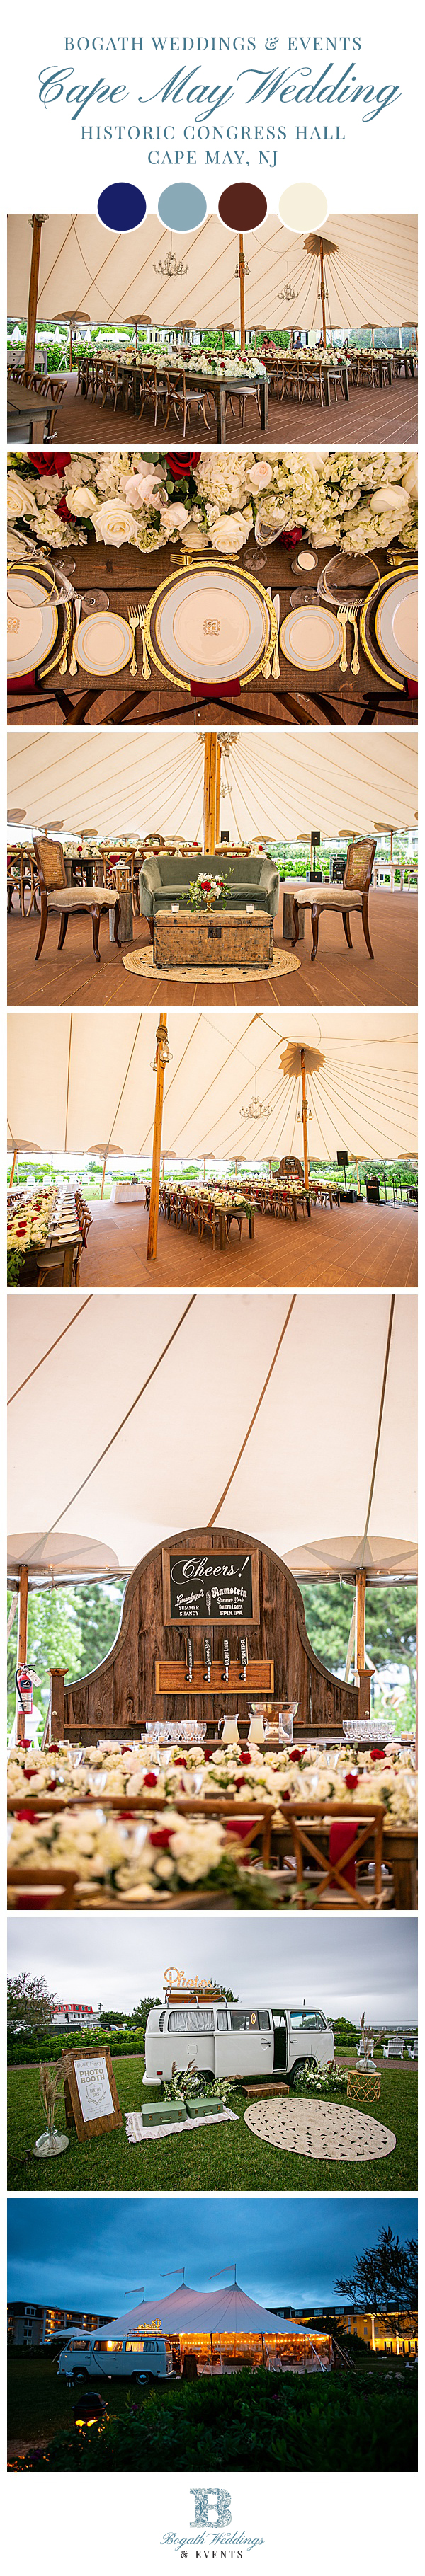 Cape-May-Wedding-tented-reception-congress-hall